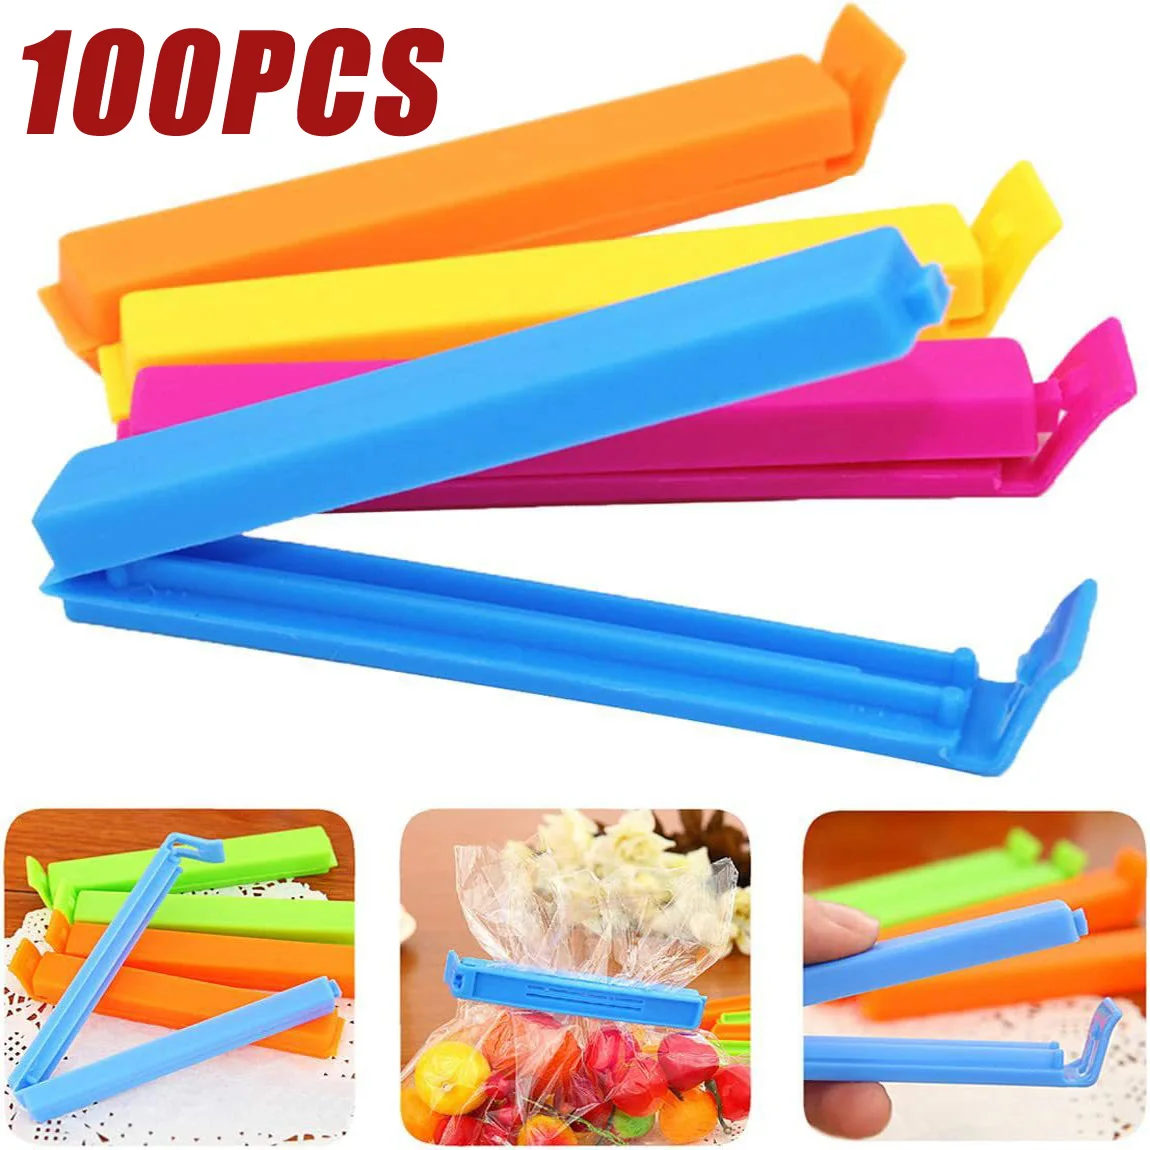 50/100PCS Portable Kitchen Storage Food Snack Seal Sealing Bag Clips Random Color Plastic Tool Kitchen Accessories Hot Sale food bag clips househould food snack storage seal sealing bag clips sealer clamp food close clip seal kitchen tool